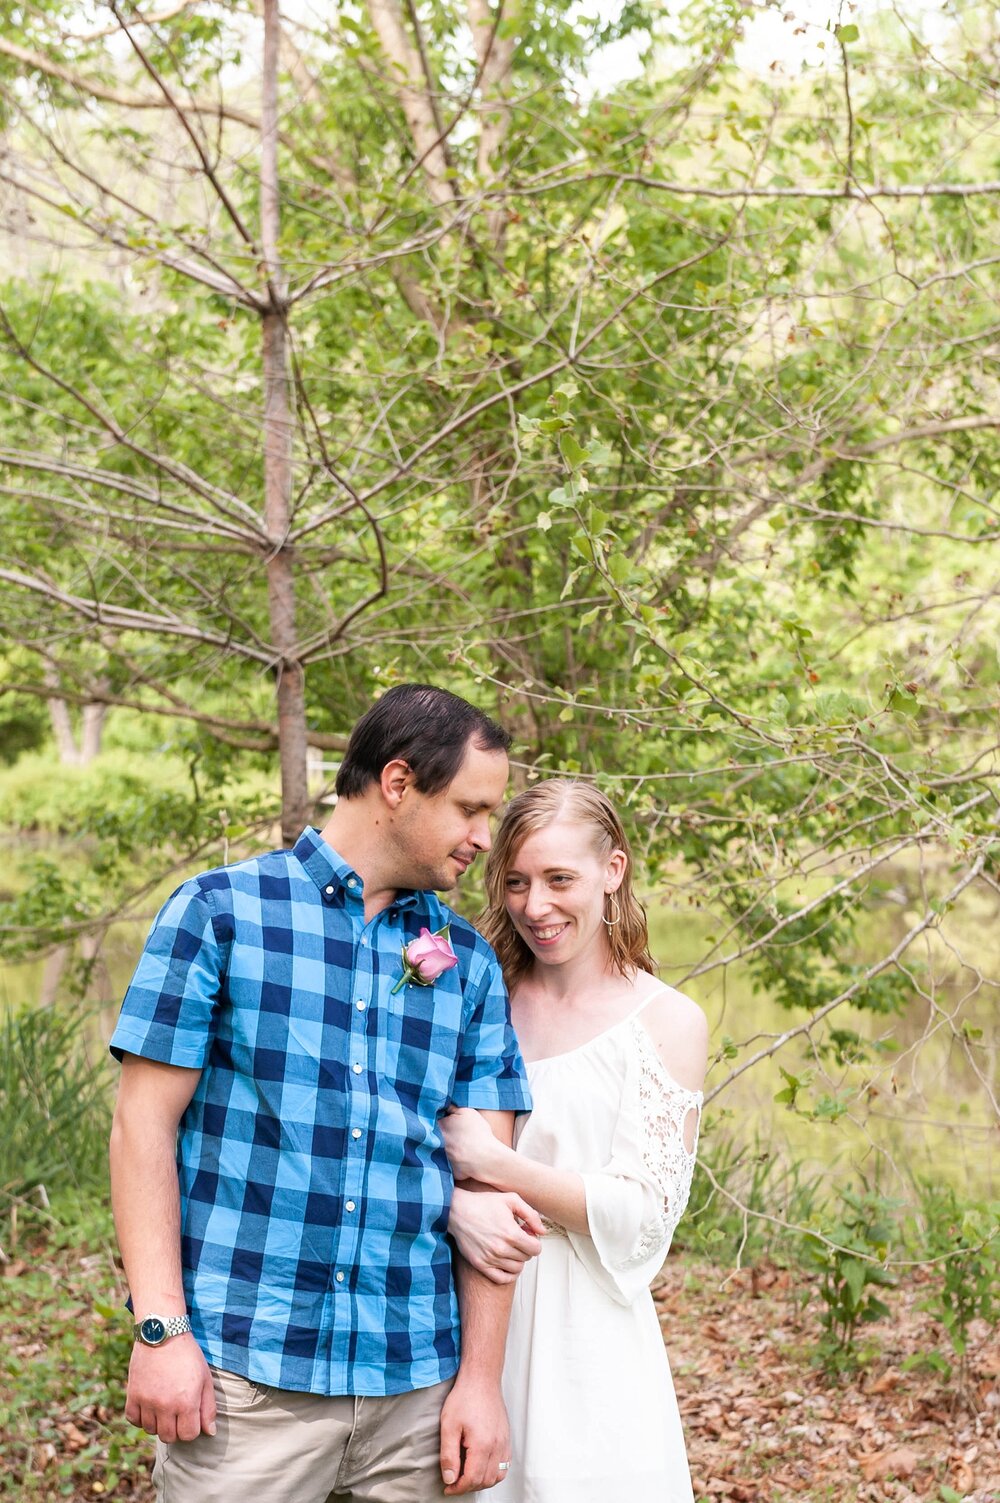 Susquehanna State Park intimate wedding in Harford, Maryland | Frederick MD wedding photographer Wendy Zook Photography captures COVID-19 elopement in Maryland